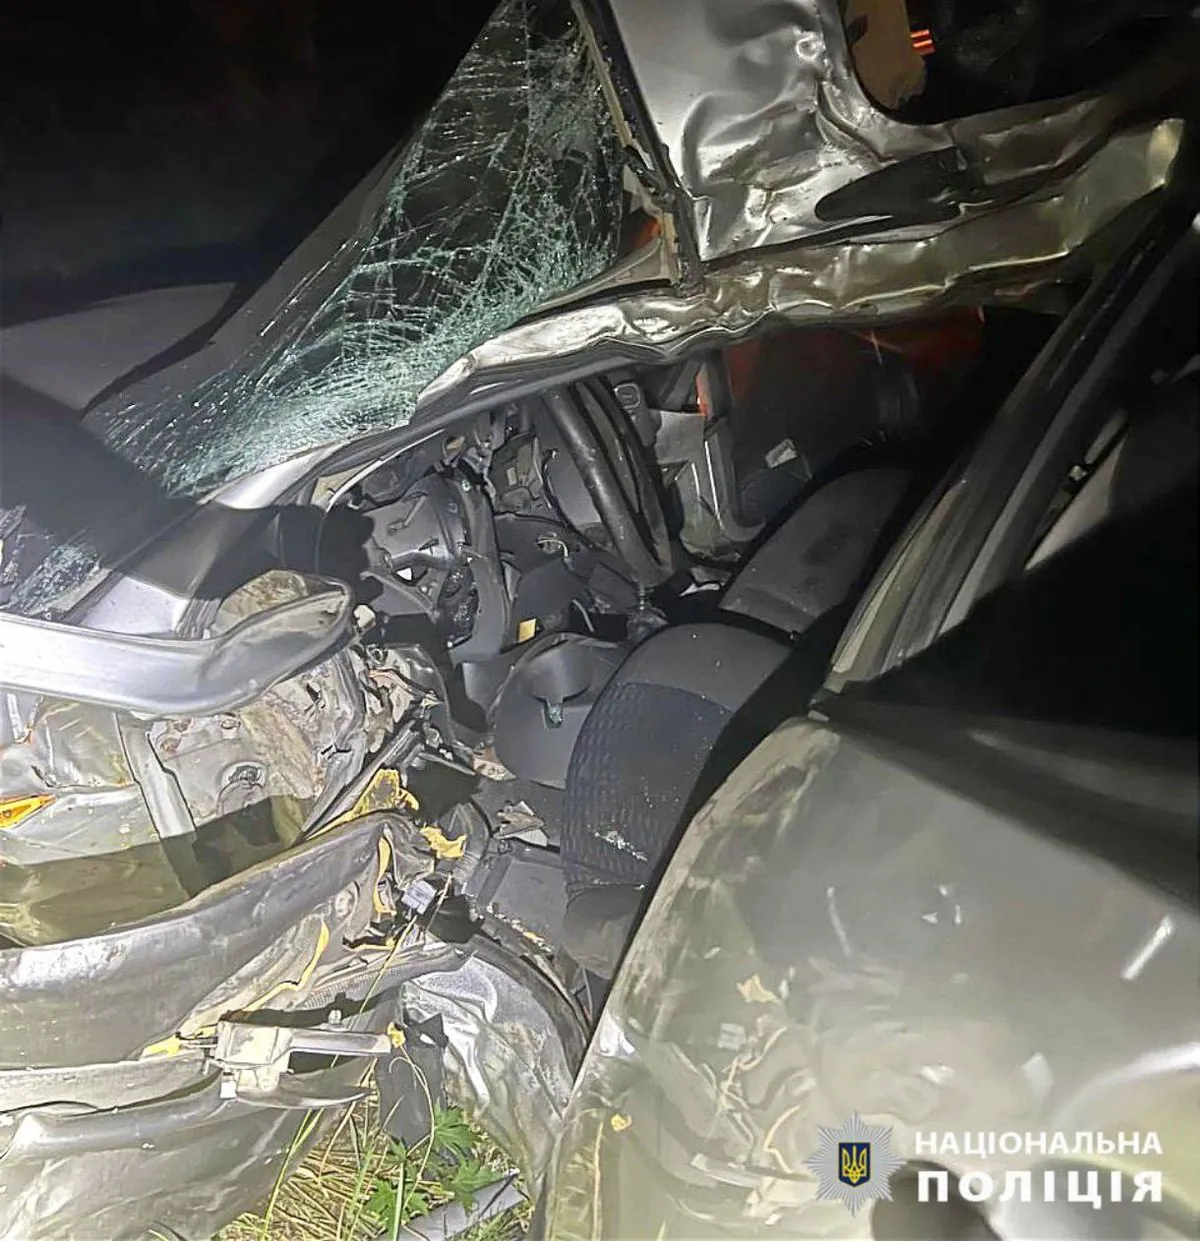 A driver dies of injuries after an accident on a Kyiv highway